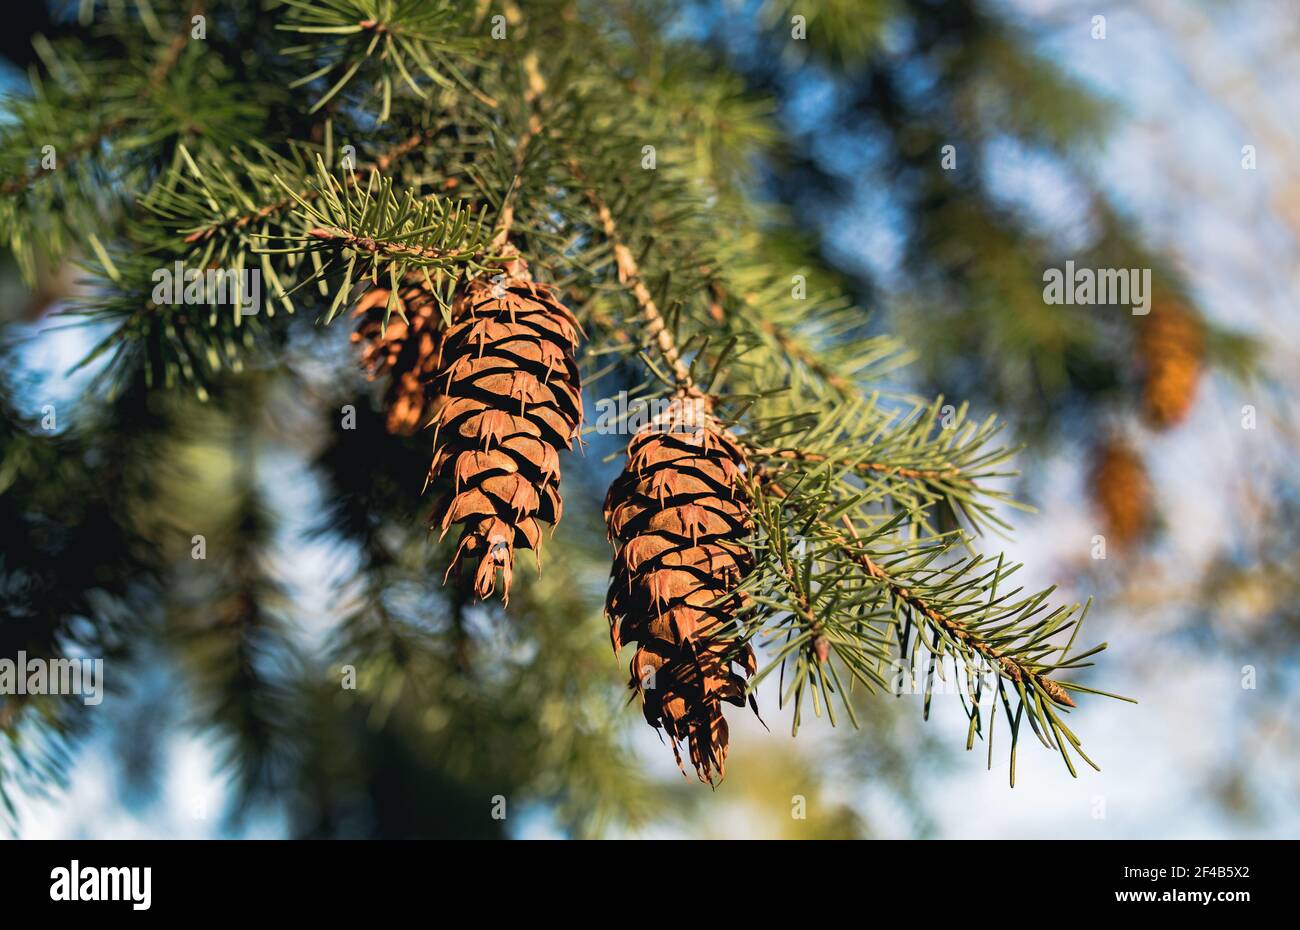 Douglas fir pine cones with long tridentine on tree branch. Oregon pine or Columbian pine. An evergreen conifer species in the pine family. Abstract a Stock Photo